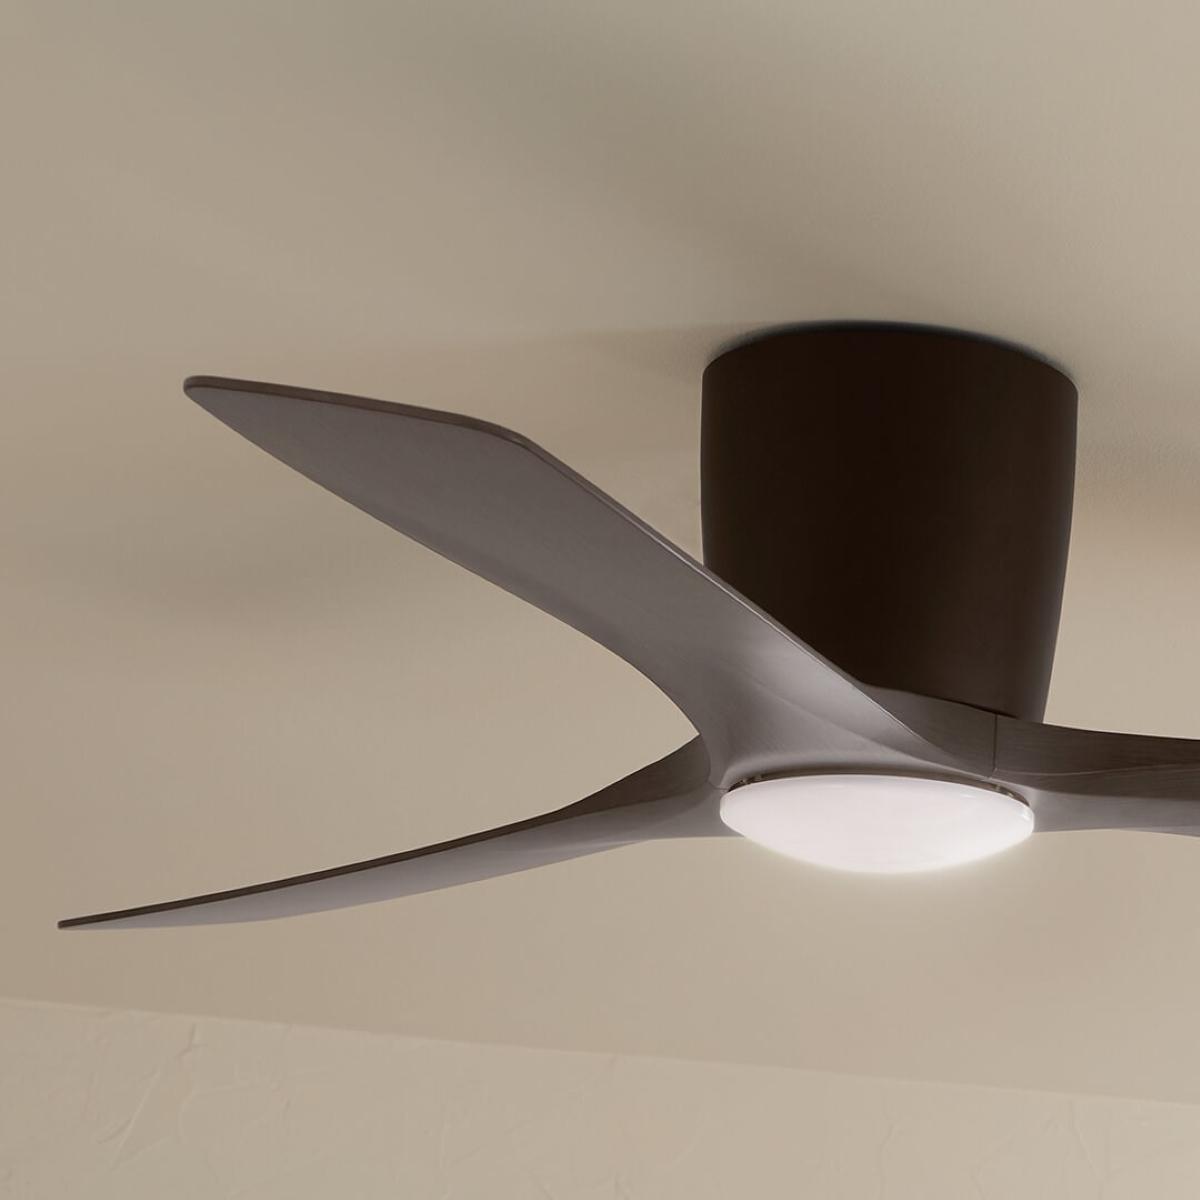 Volos 54 Inch Contemporary Ceiling Fan With Light, Wall Control Included - Bees Lighting